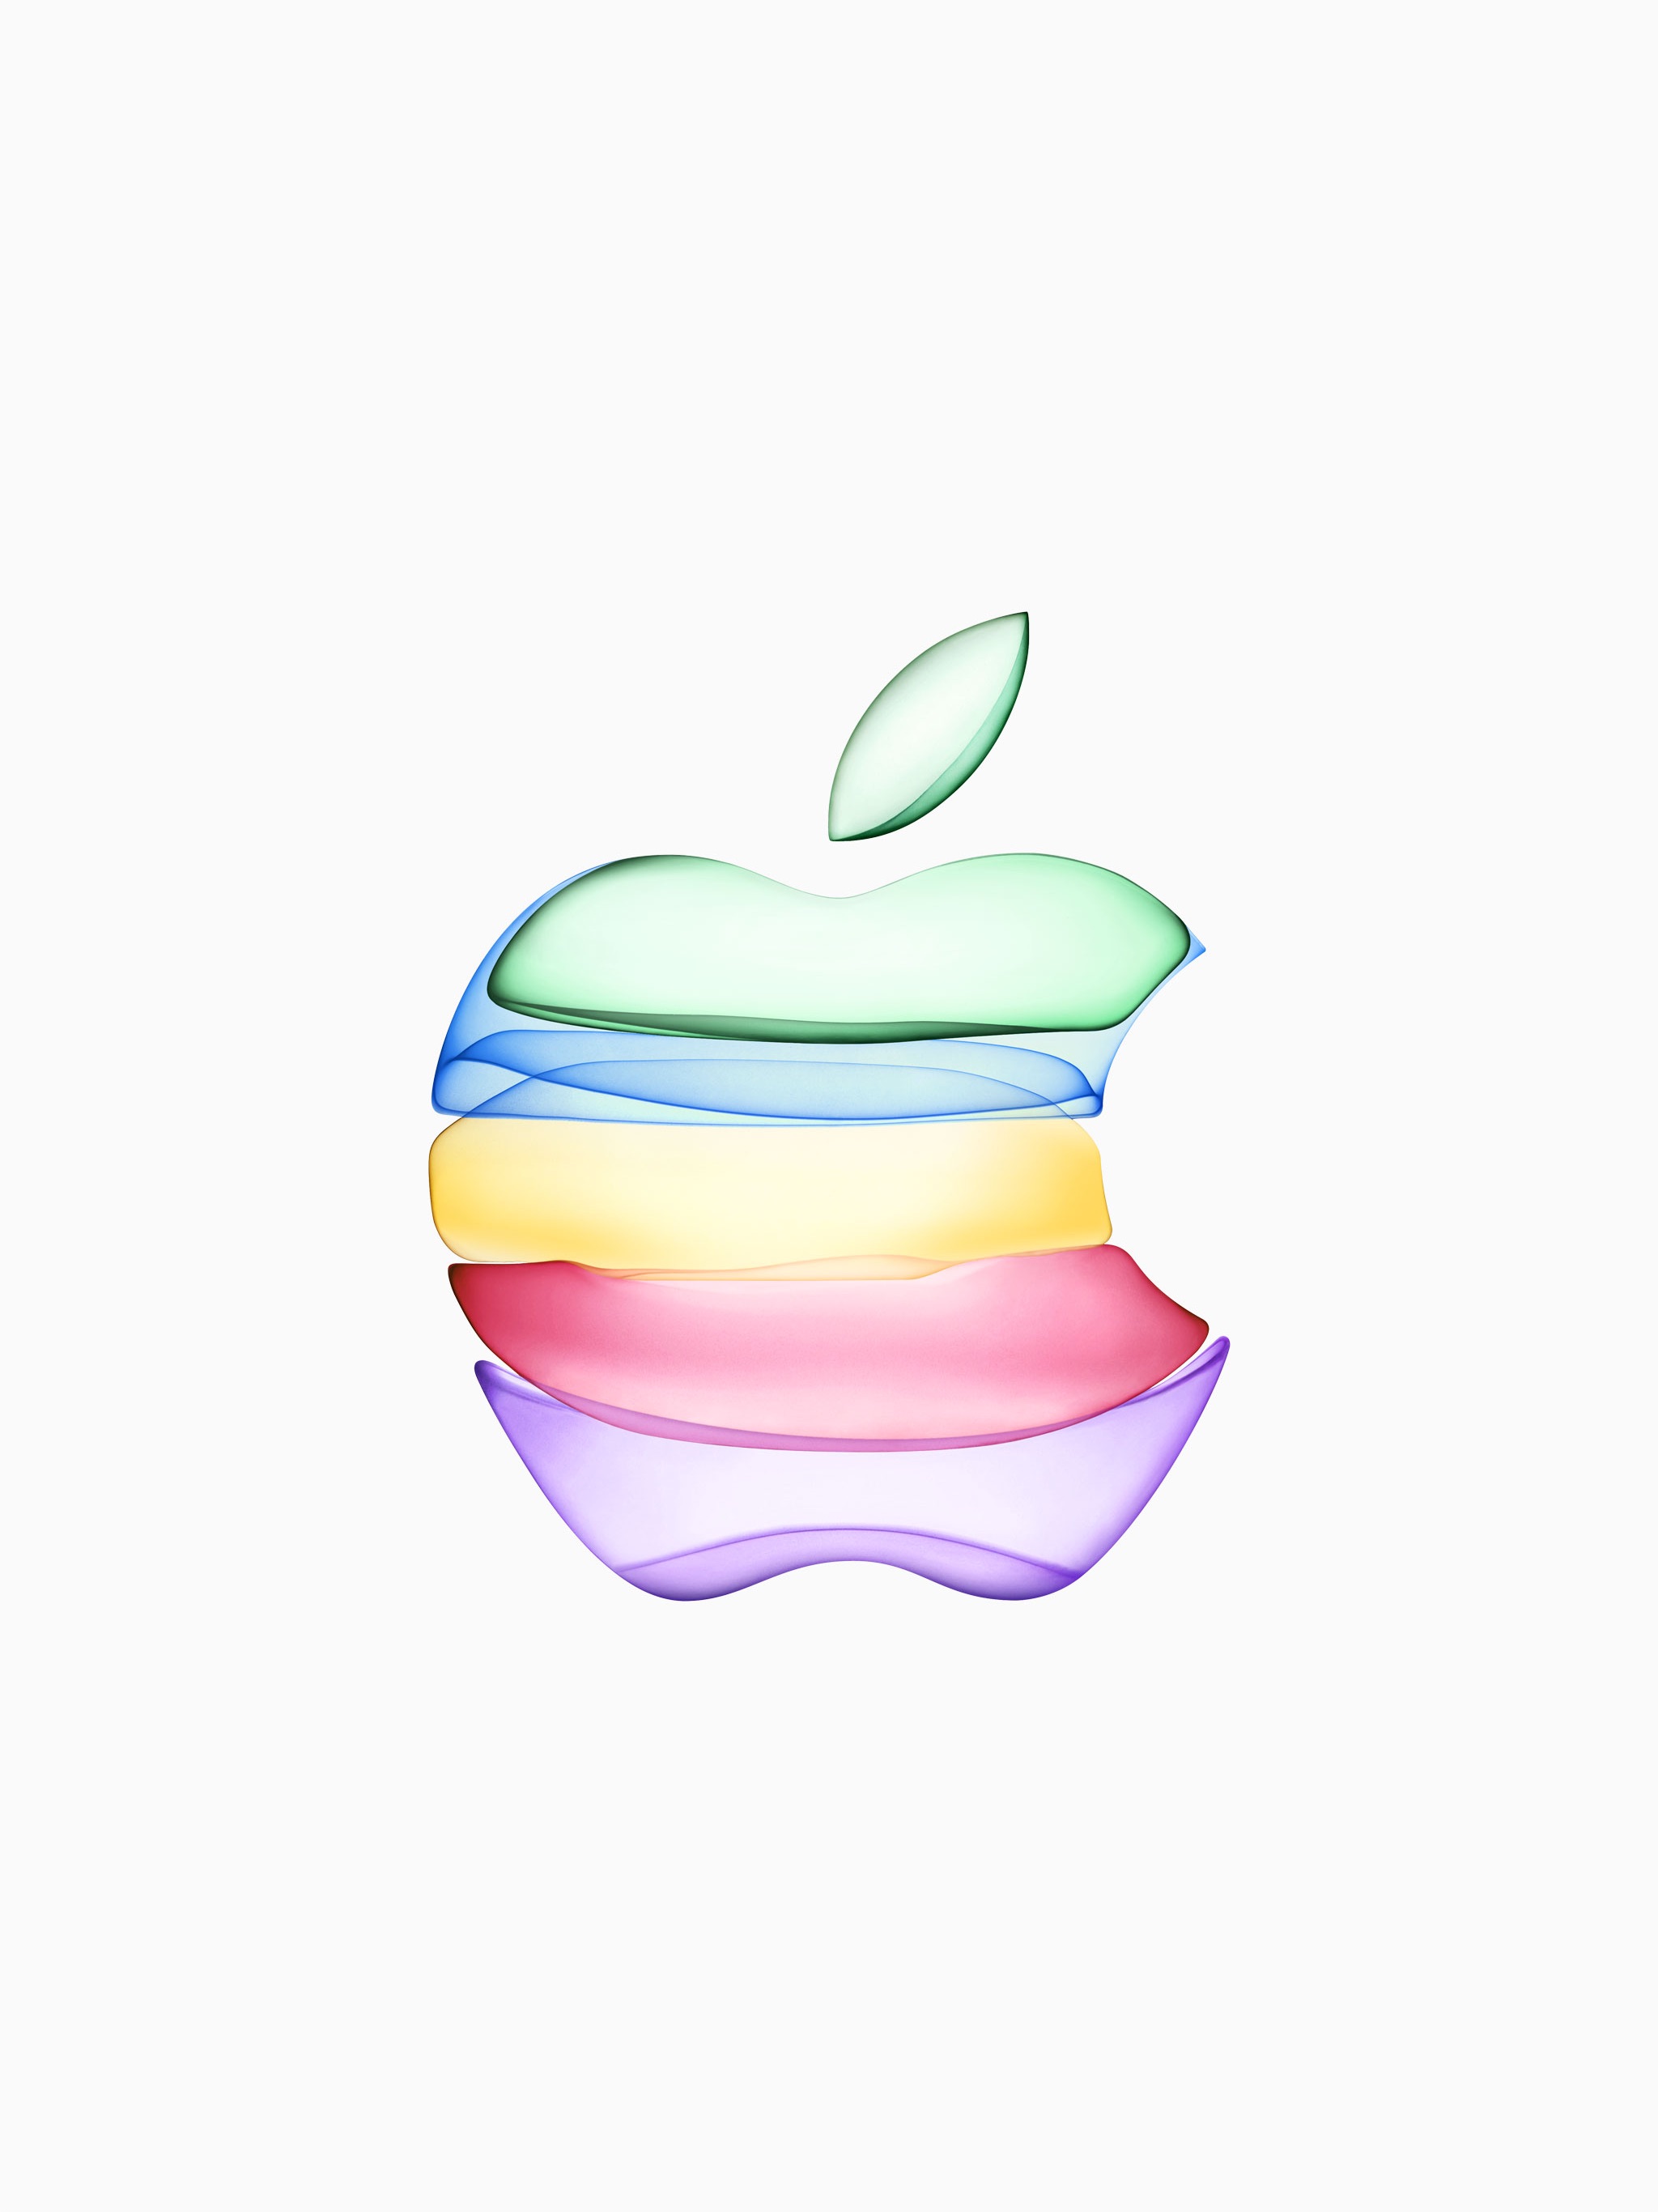 Download Iphone 11 Event Apple Logo Wallpapers For Iphone Ipad And Mac Ios Hacker